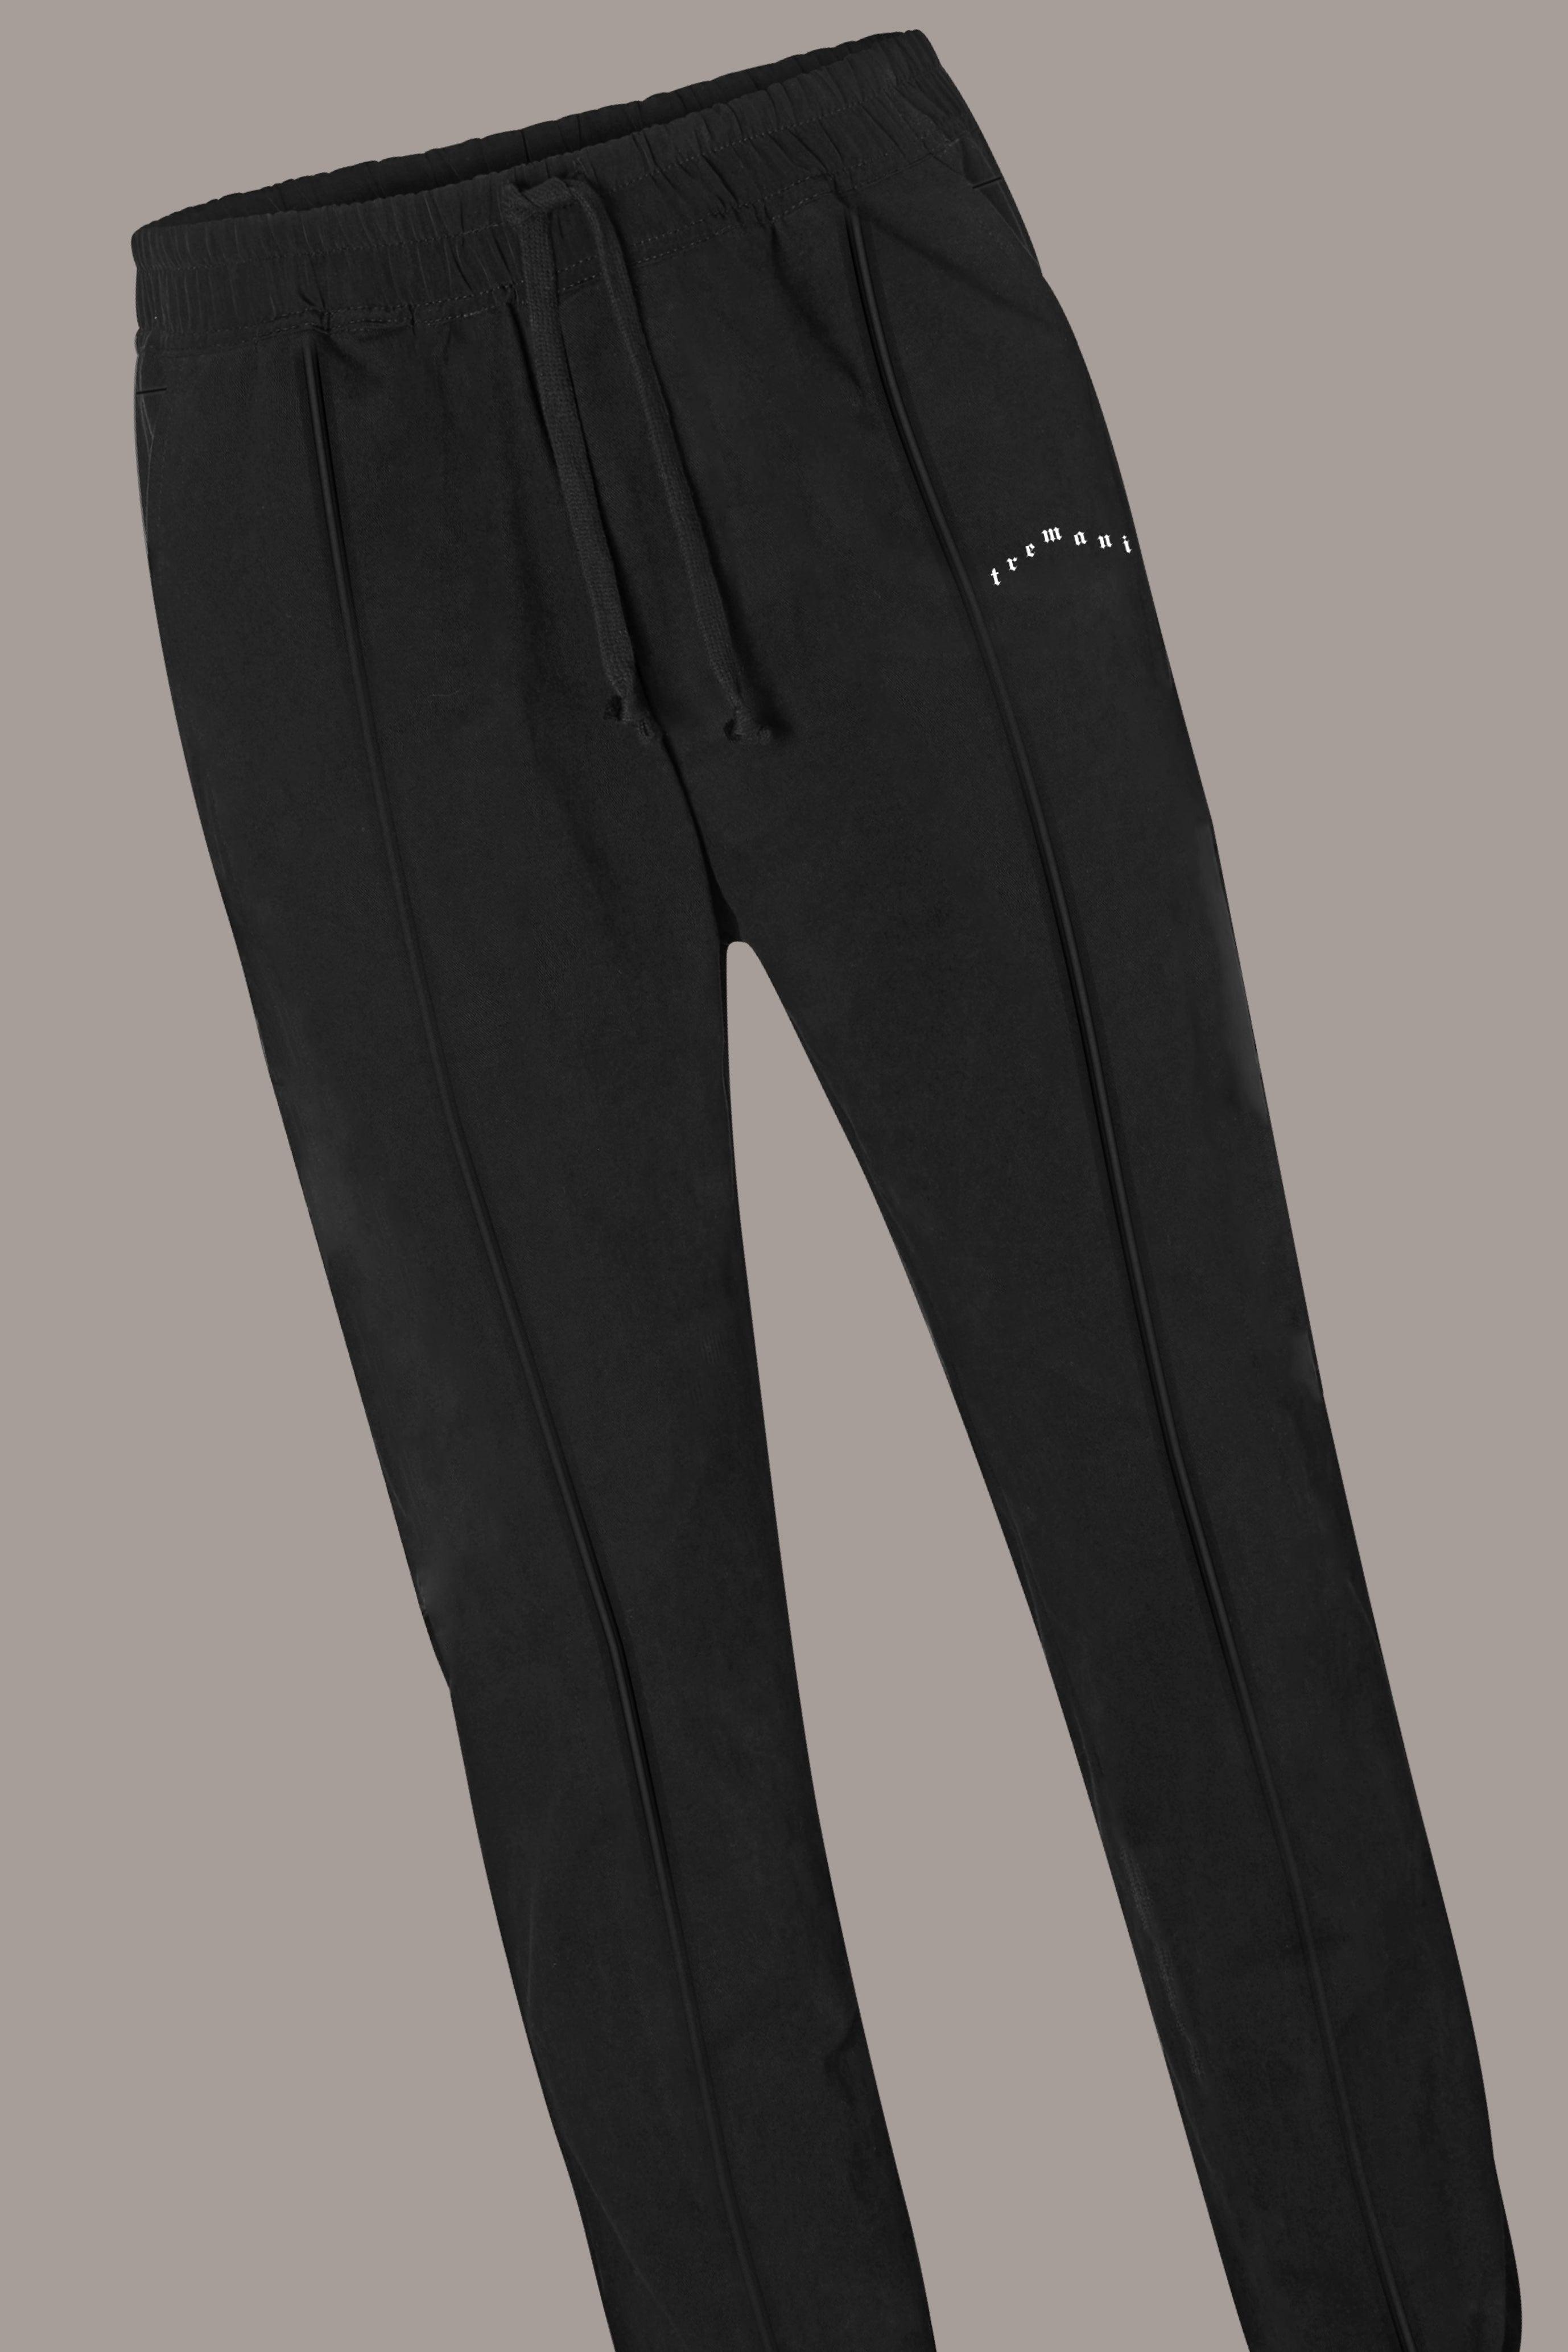 TWILL LOUNGE PANT - TWILL LOUNGE PANT - ROSE IN GOOD FAITH